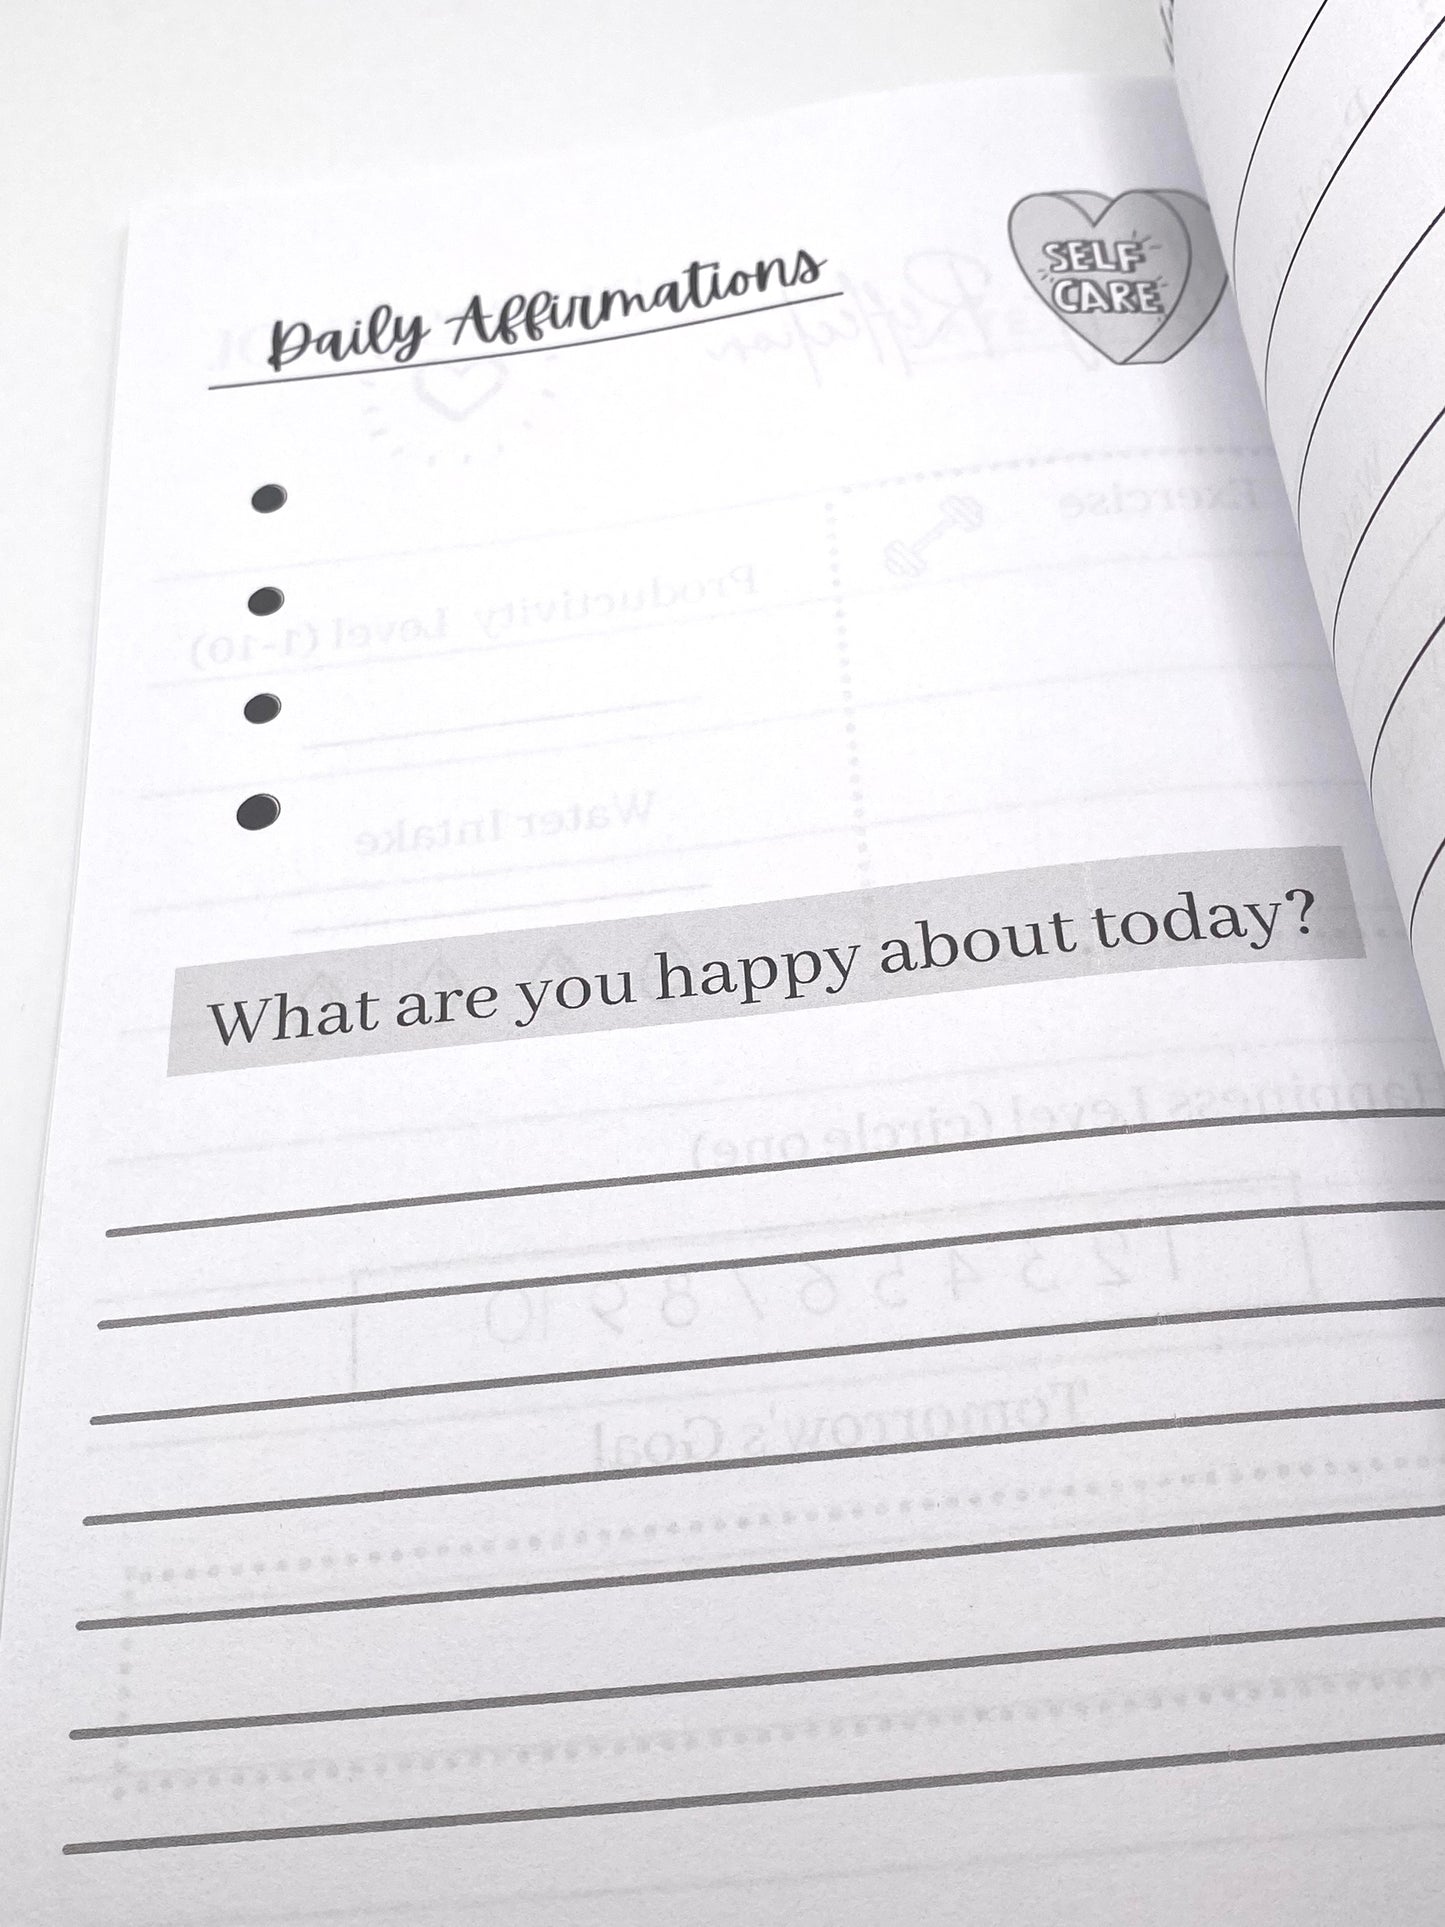 Daily Journal with Affirmations